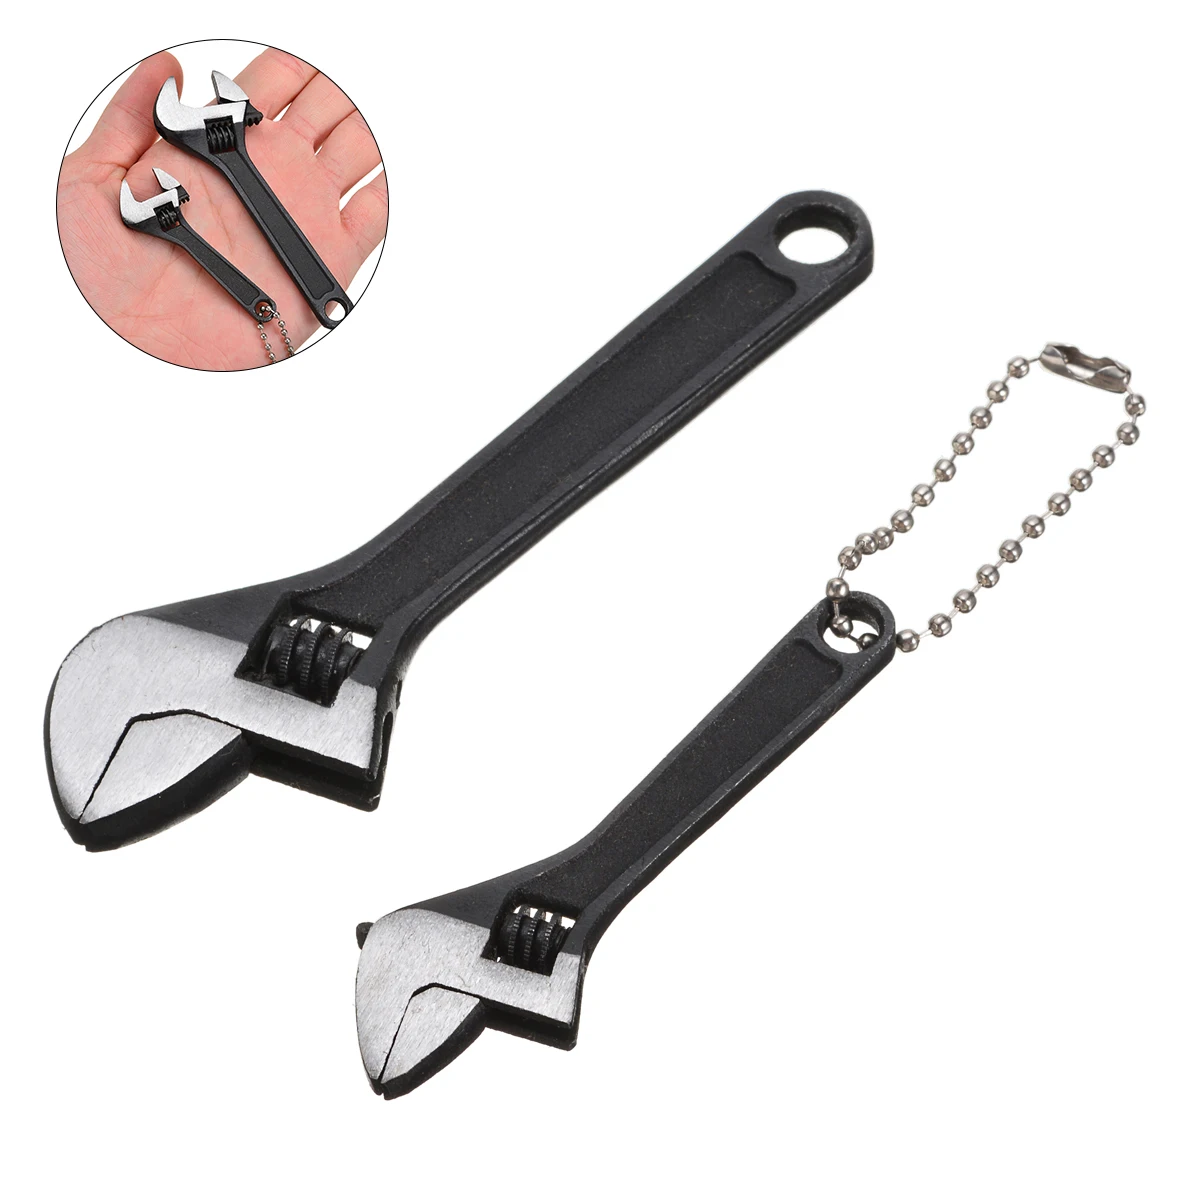 US 4" 100mm Mini Adjustable Spanner/Wrench Hand Tools For Repair 14mm Opening